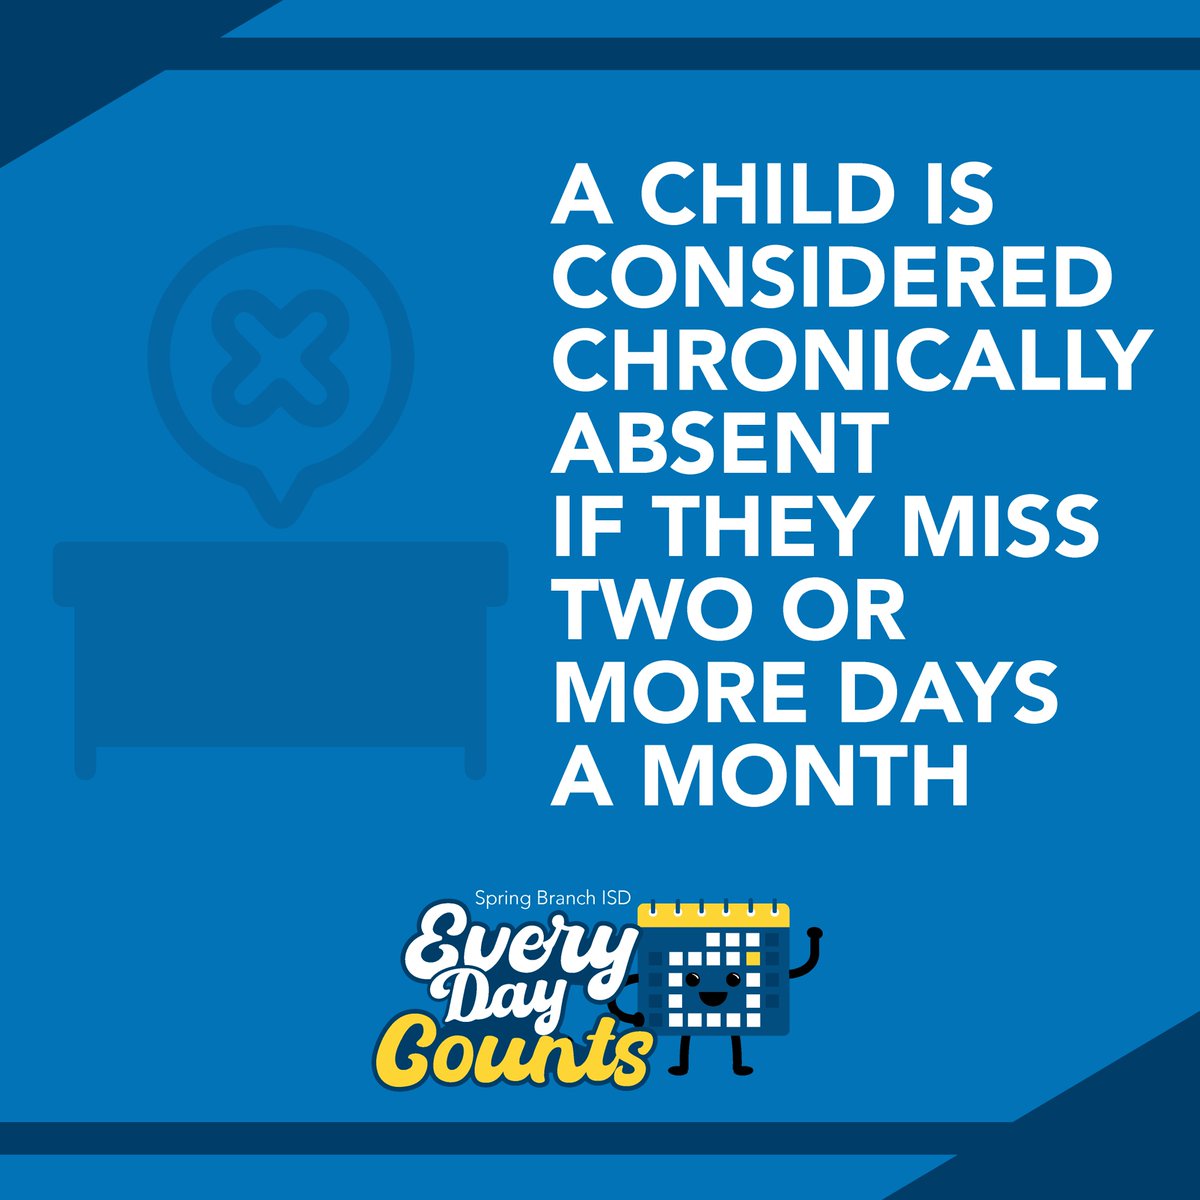 Did you know that a child is considered chronically absent if they miss two or more days a month? That includes unexcused and excused absences. #EveryDayCounts